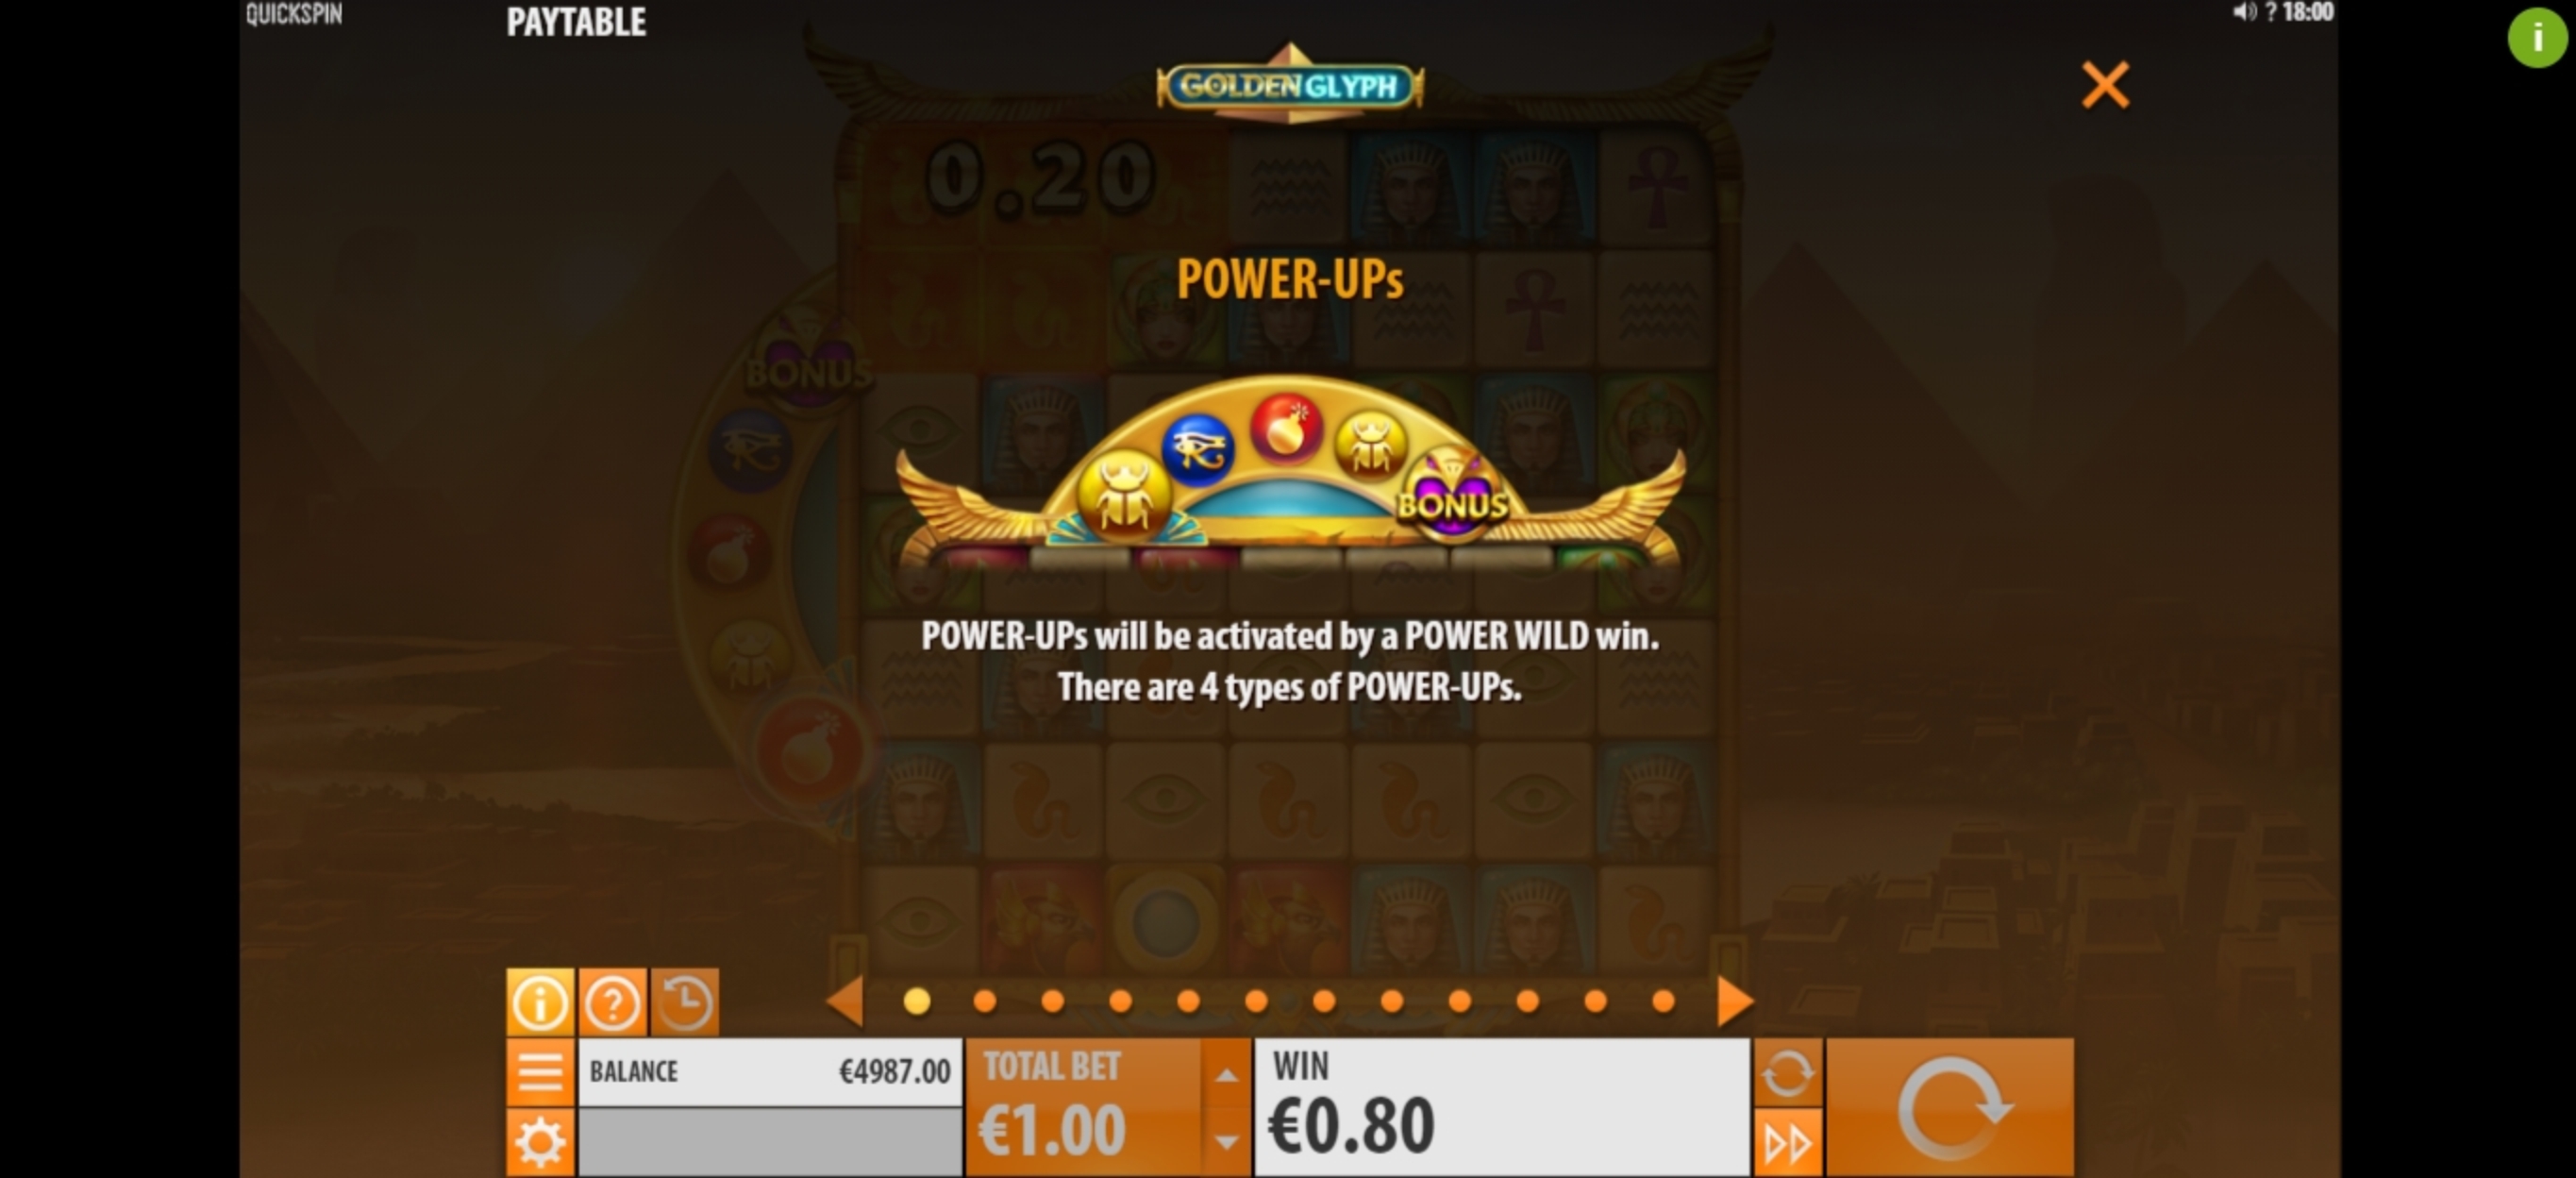 Info of Golden Glyph Slot Game by Quickspin